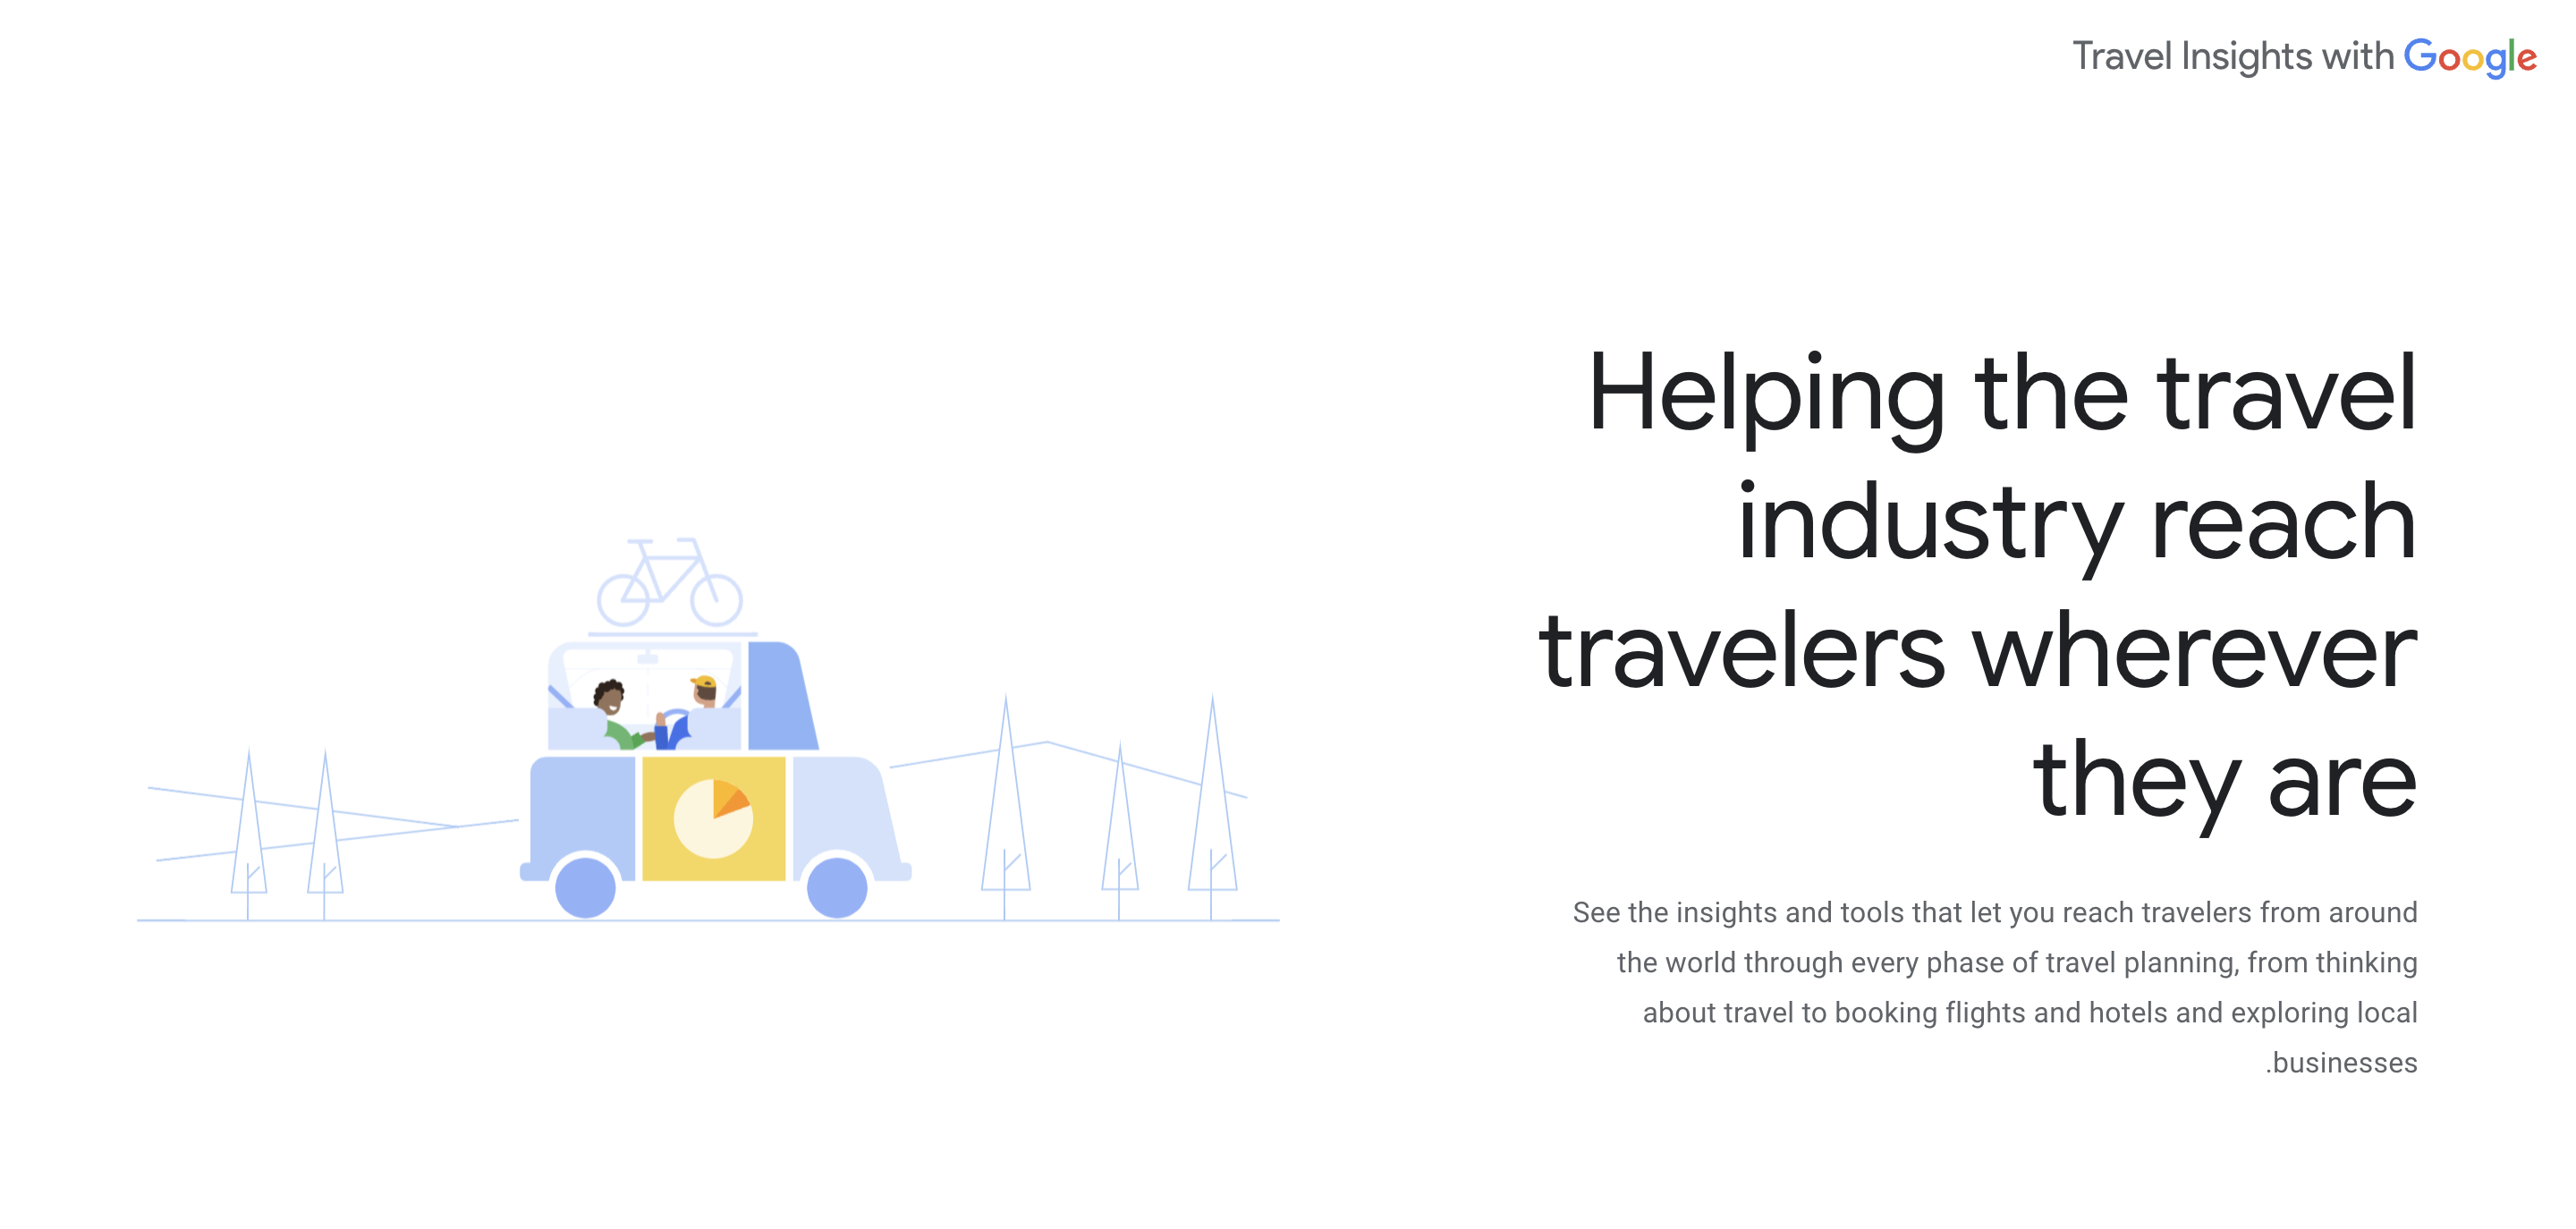 Google's Brand New Travel Insights Tools Now Available for the MENA Region